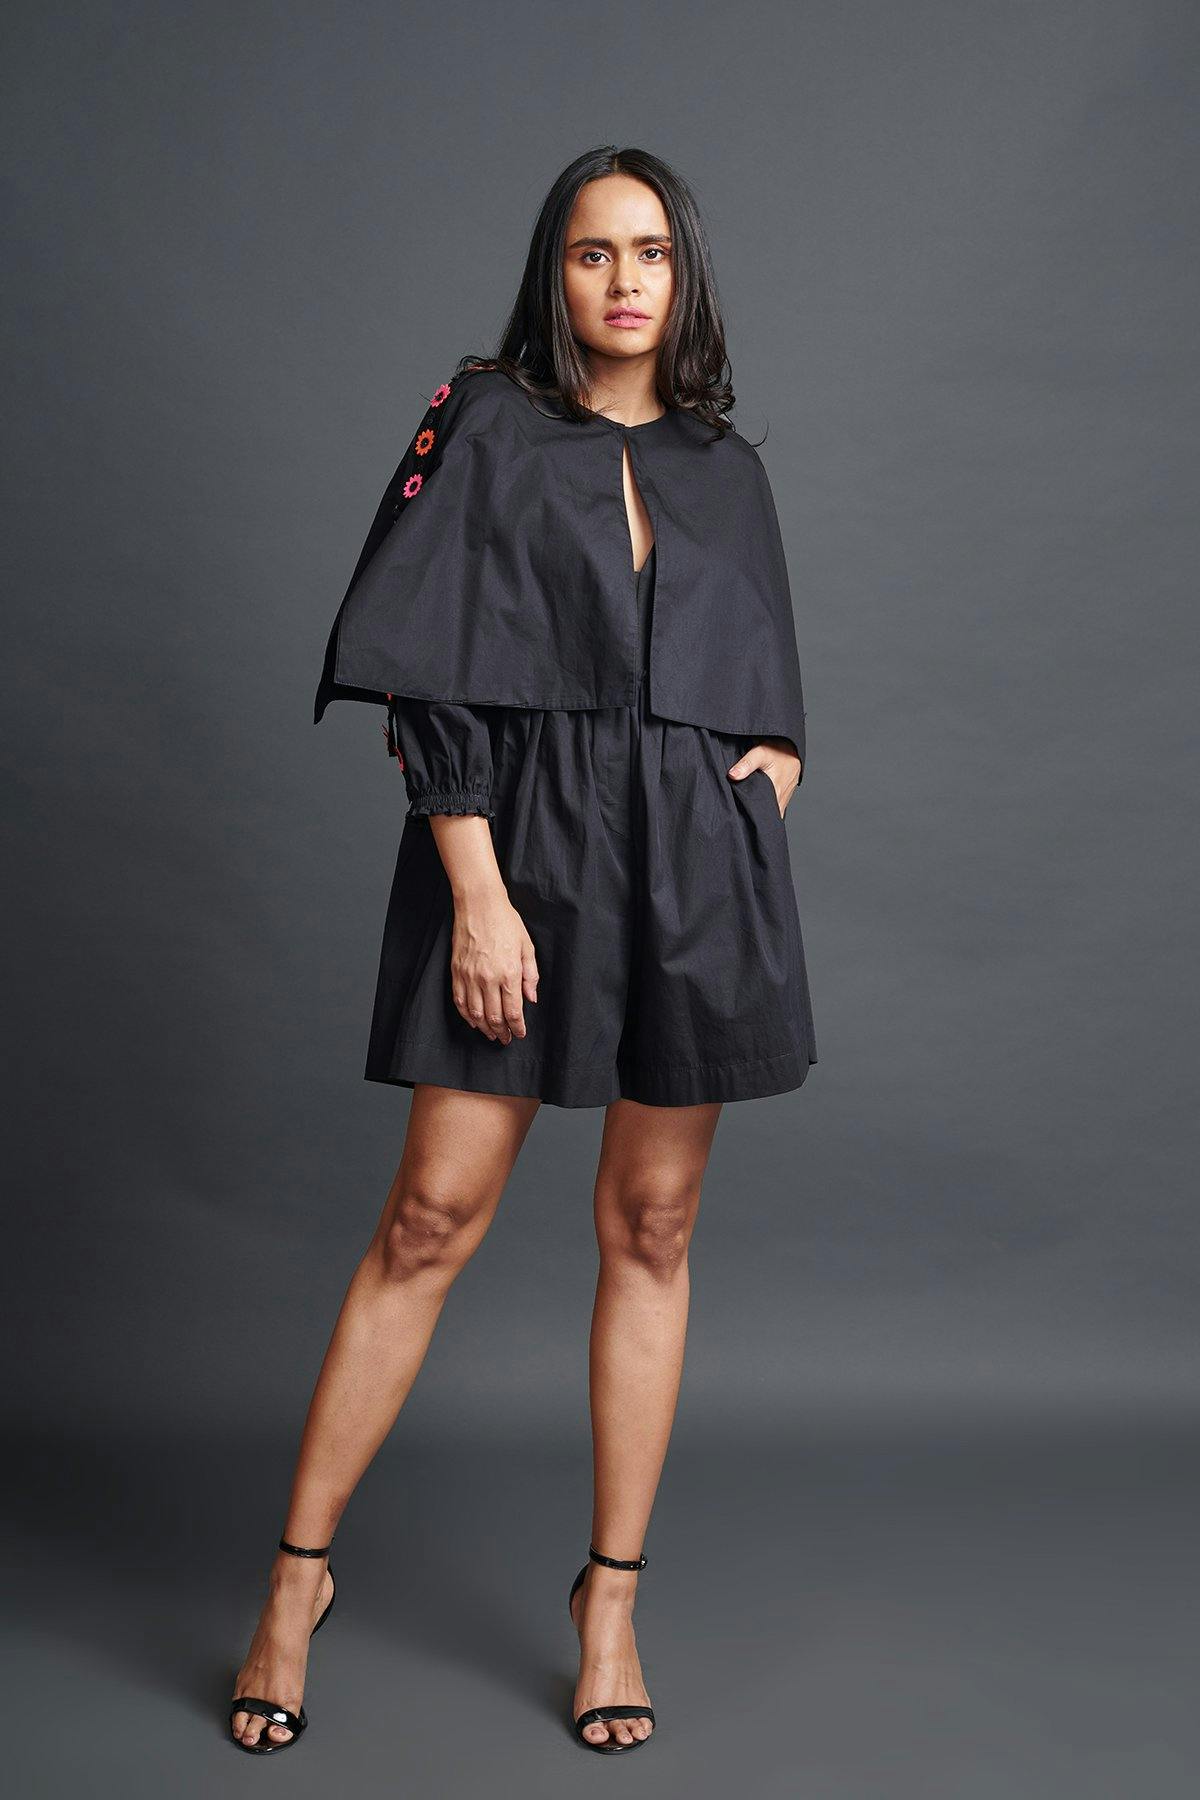 black playsuit with embroidered, a product by Deepika Arora